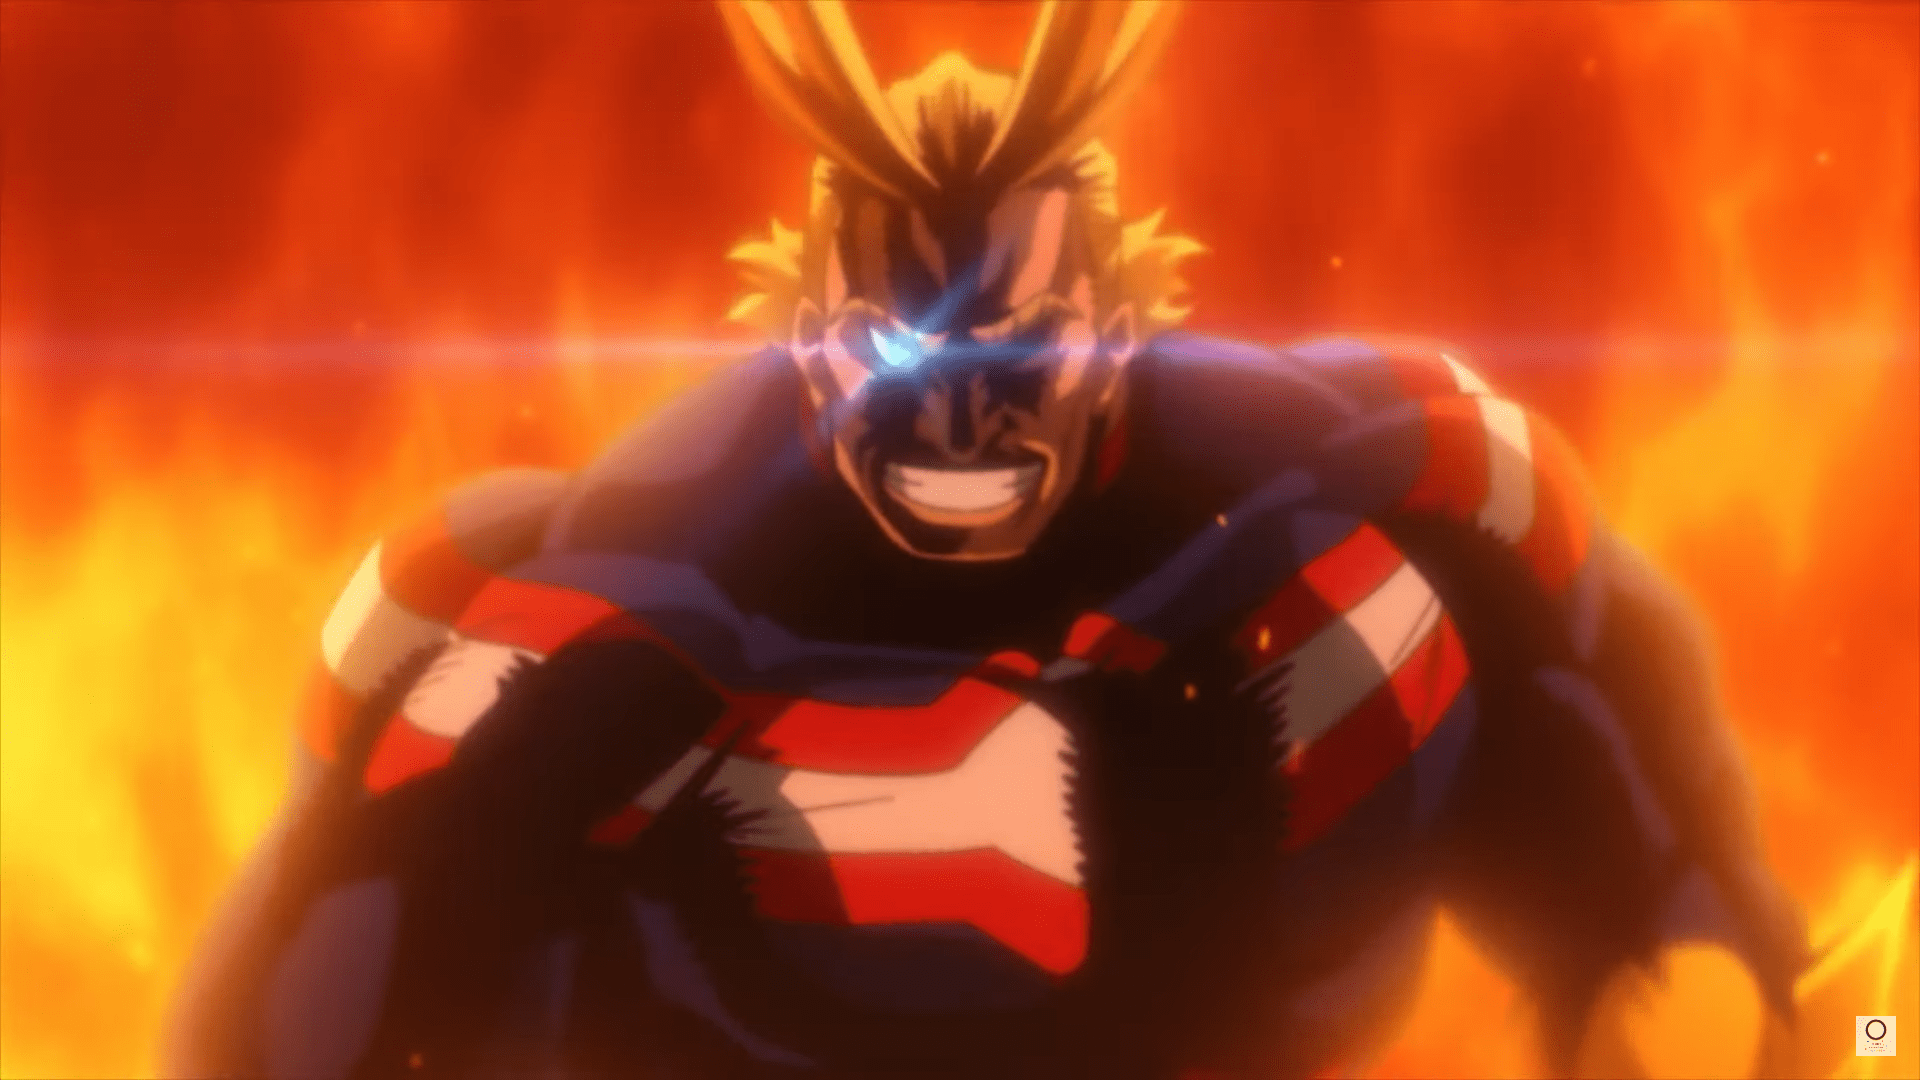 My Hero Academia Season 7 Release Date Rumors: When Is It Coming Out?